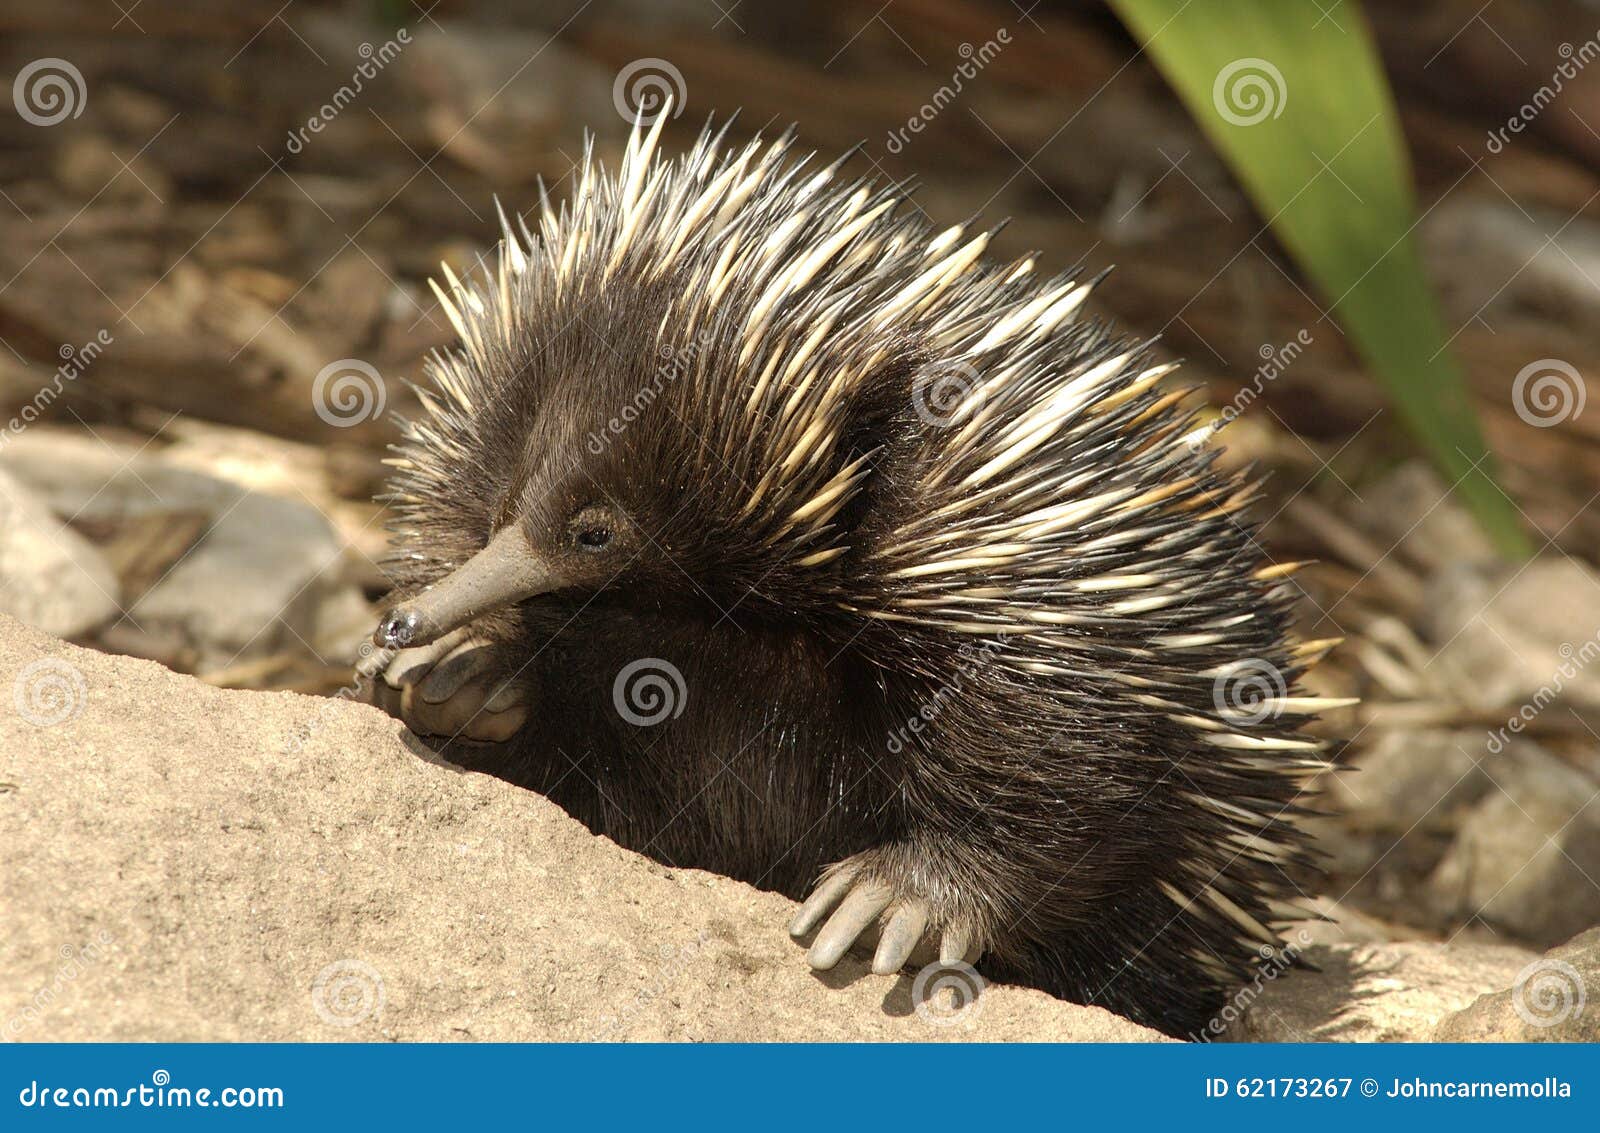 Spiny anteater stock Image of echidna - 62173267